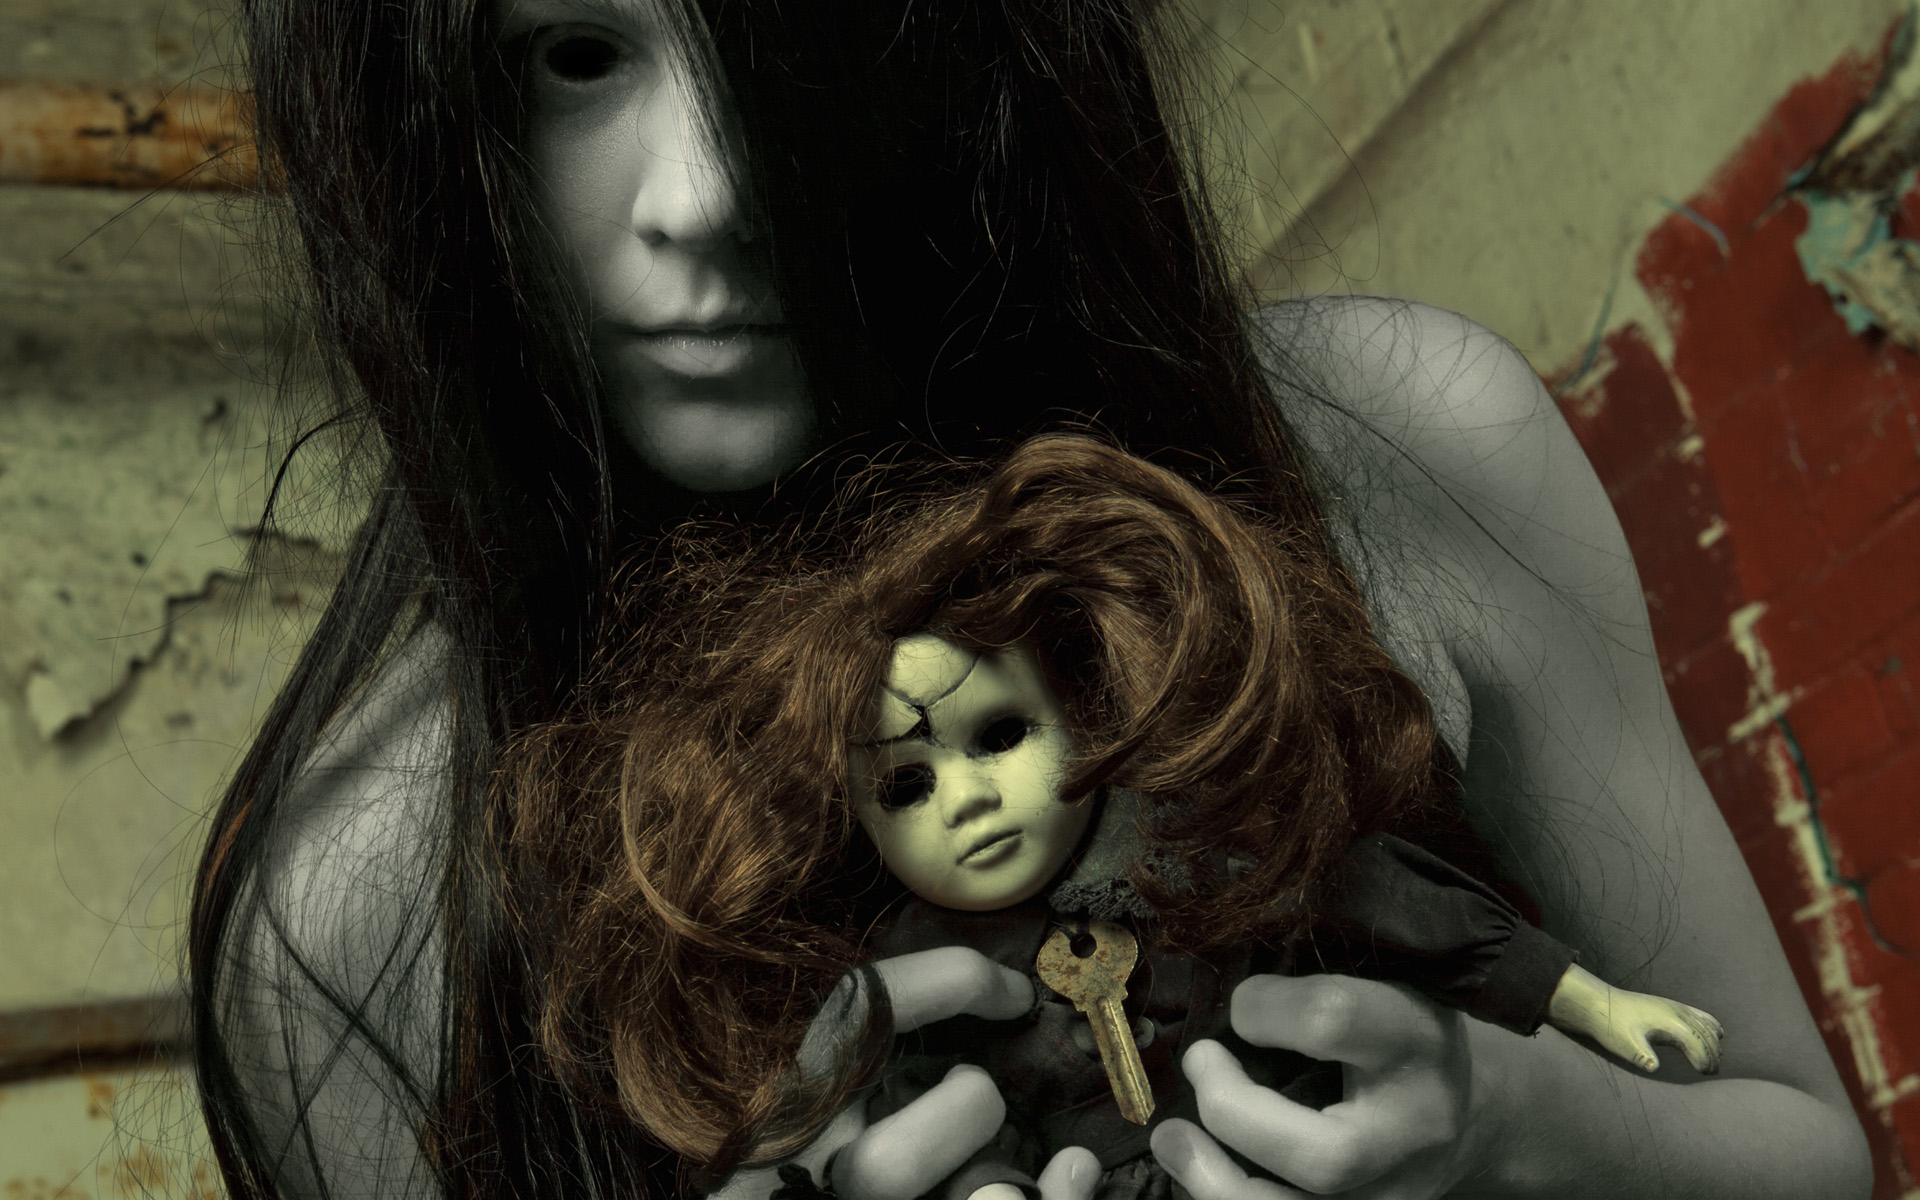 Ghostly dead girl with creepy doll